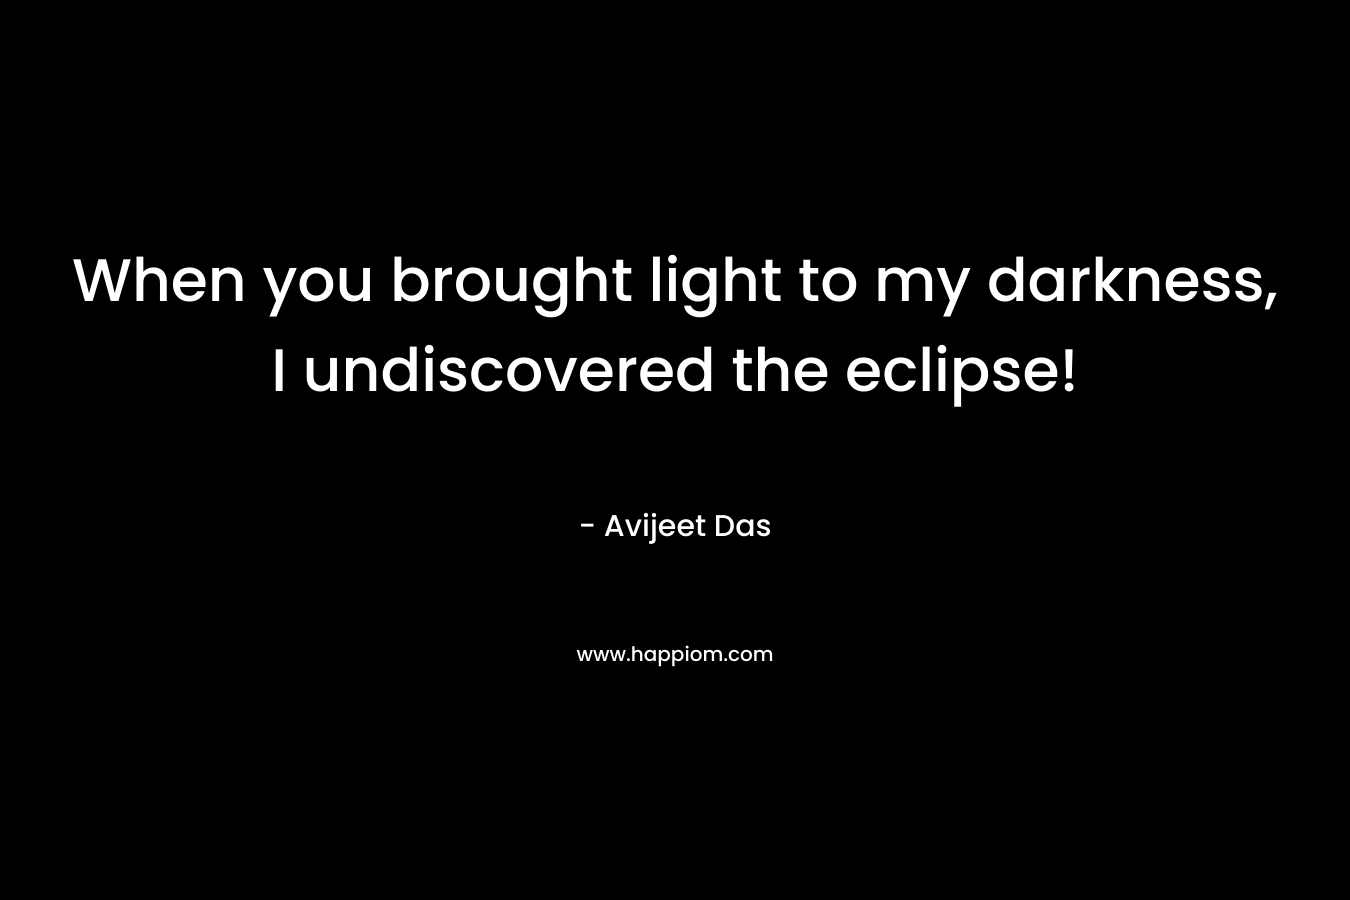 When you brought light to my darkness, I undiscovered the eclipse!